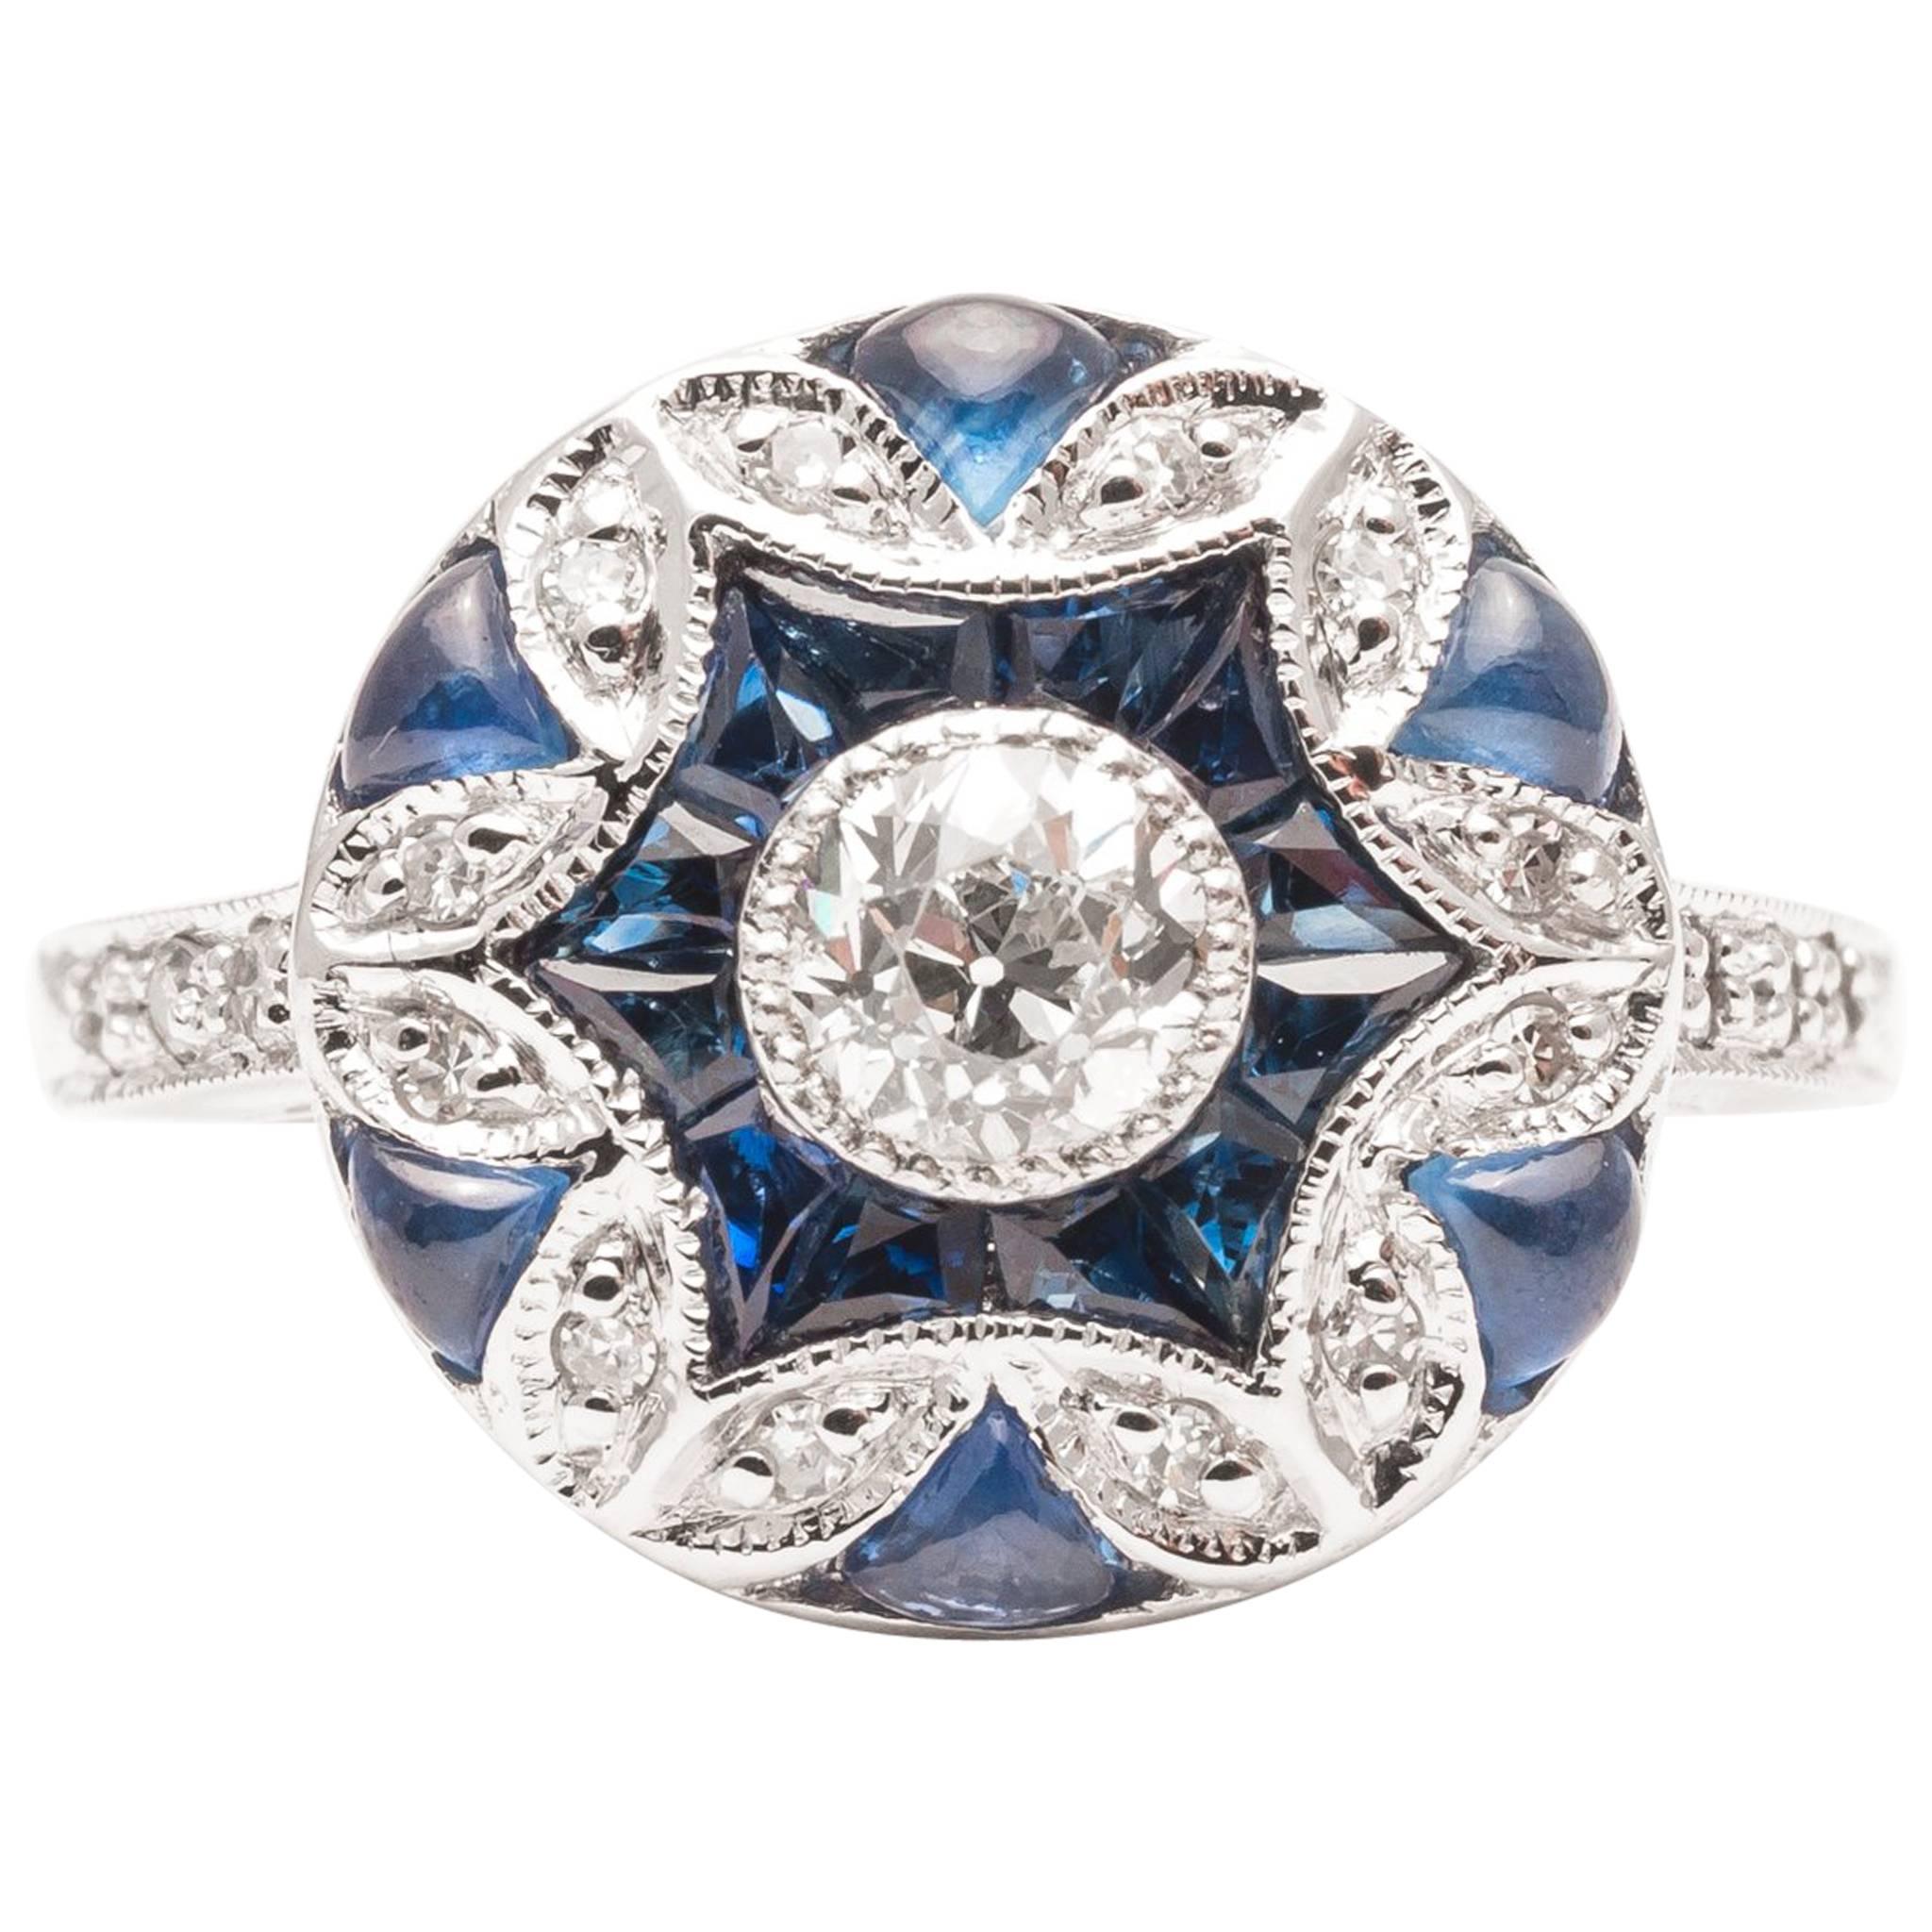 Exquisite Diamond and French Cut Sapphire White Gold Ring